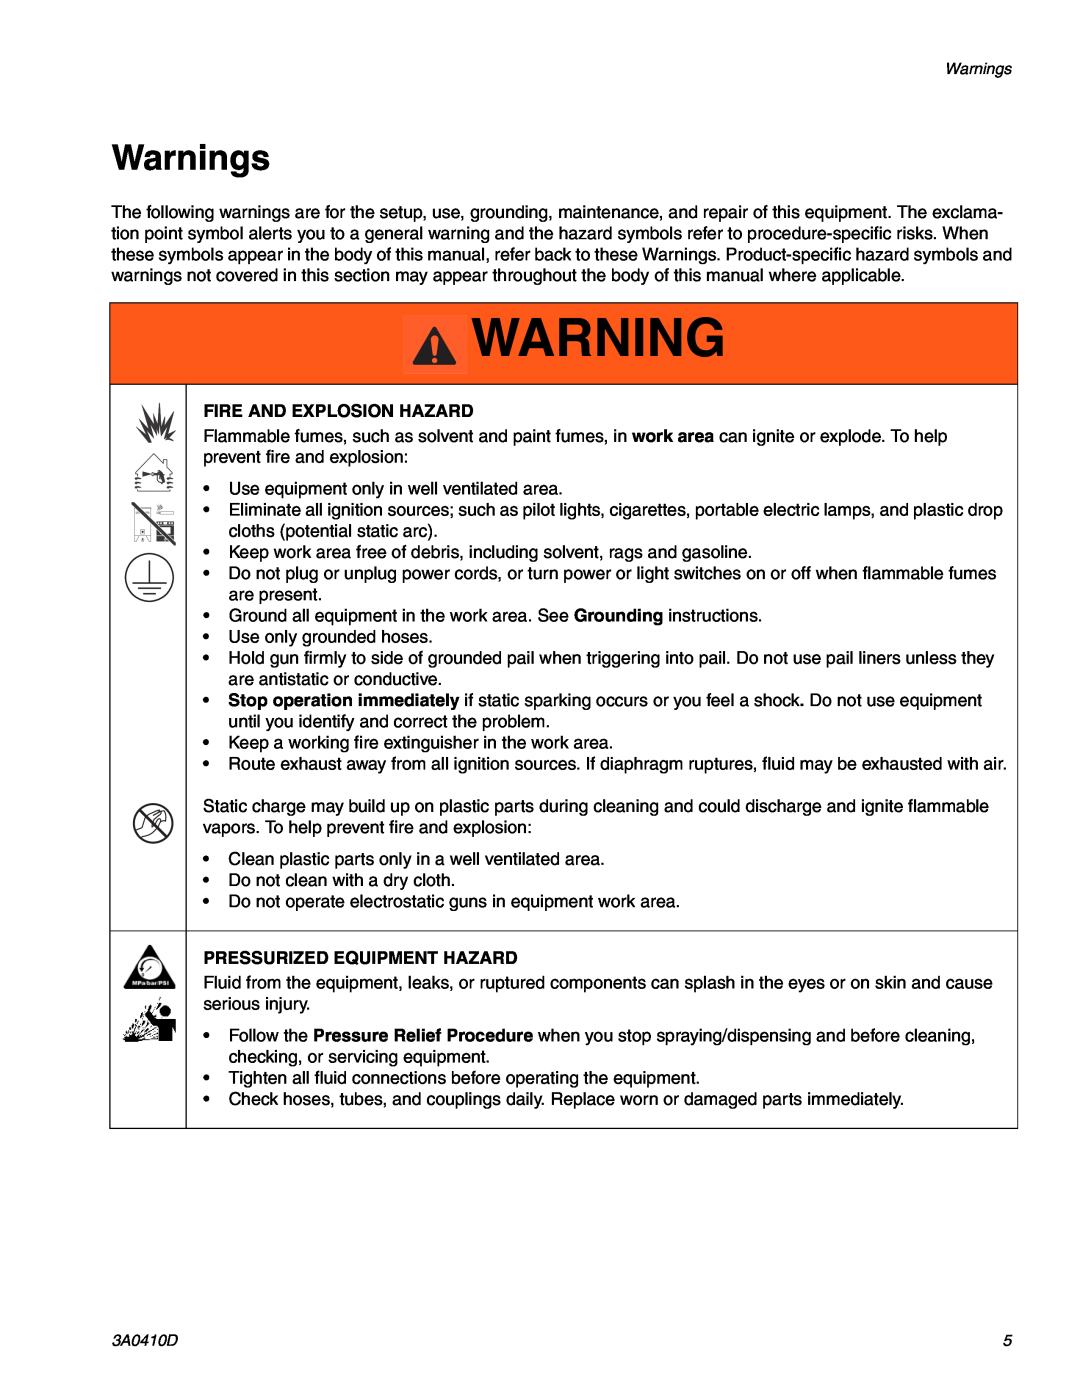 Graco 3A0410D important safety instructions Warnings, Fire And Explosion Hazard, Pressurized Equipment Hazard 